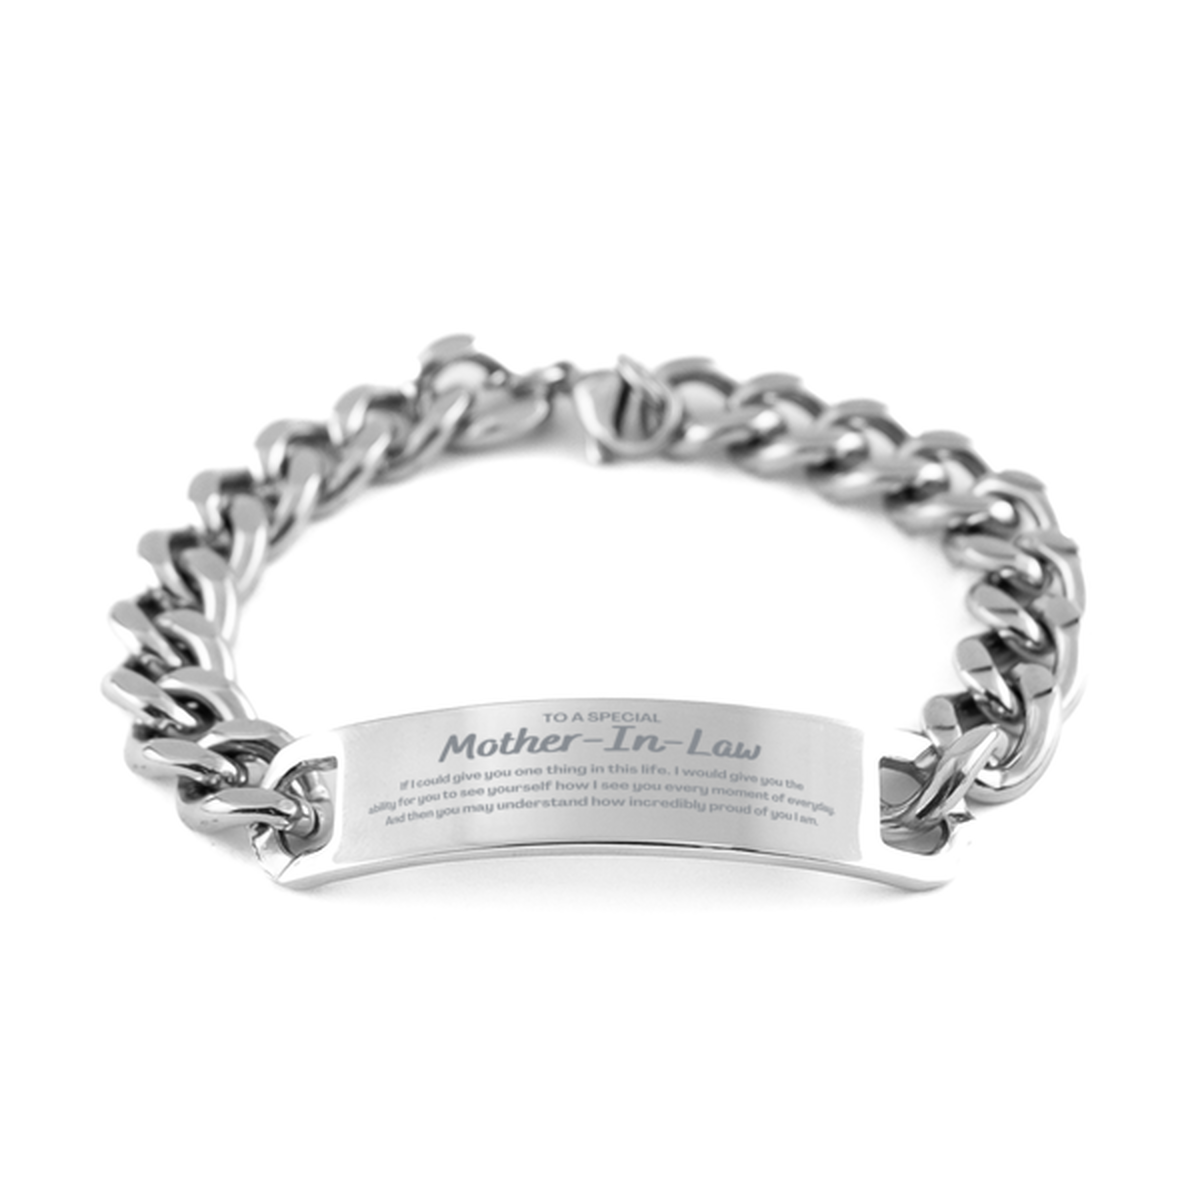 To My Mother-In-Law Cuban Chain Stainless Steel Bracelet, Gifts For Mother-In-Law Engraved, Inspirational Gifts for Christmas Birthday, Epic Gifts for Mother-In-Law To A Special Mother-In-Law how incredibly proud of you I am